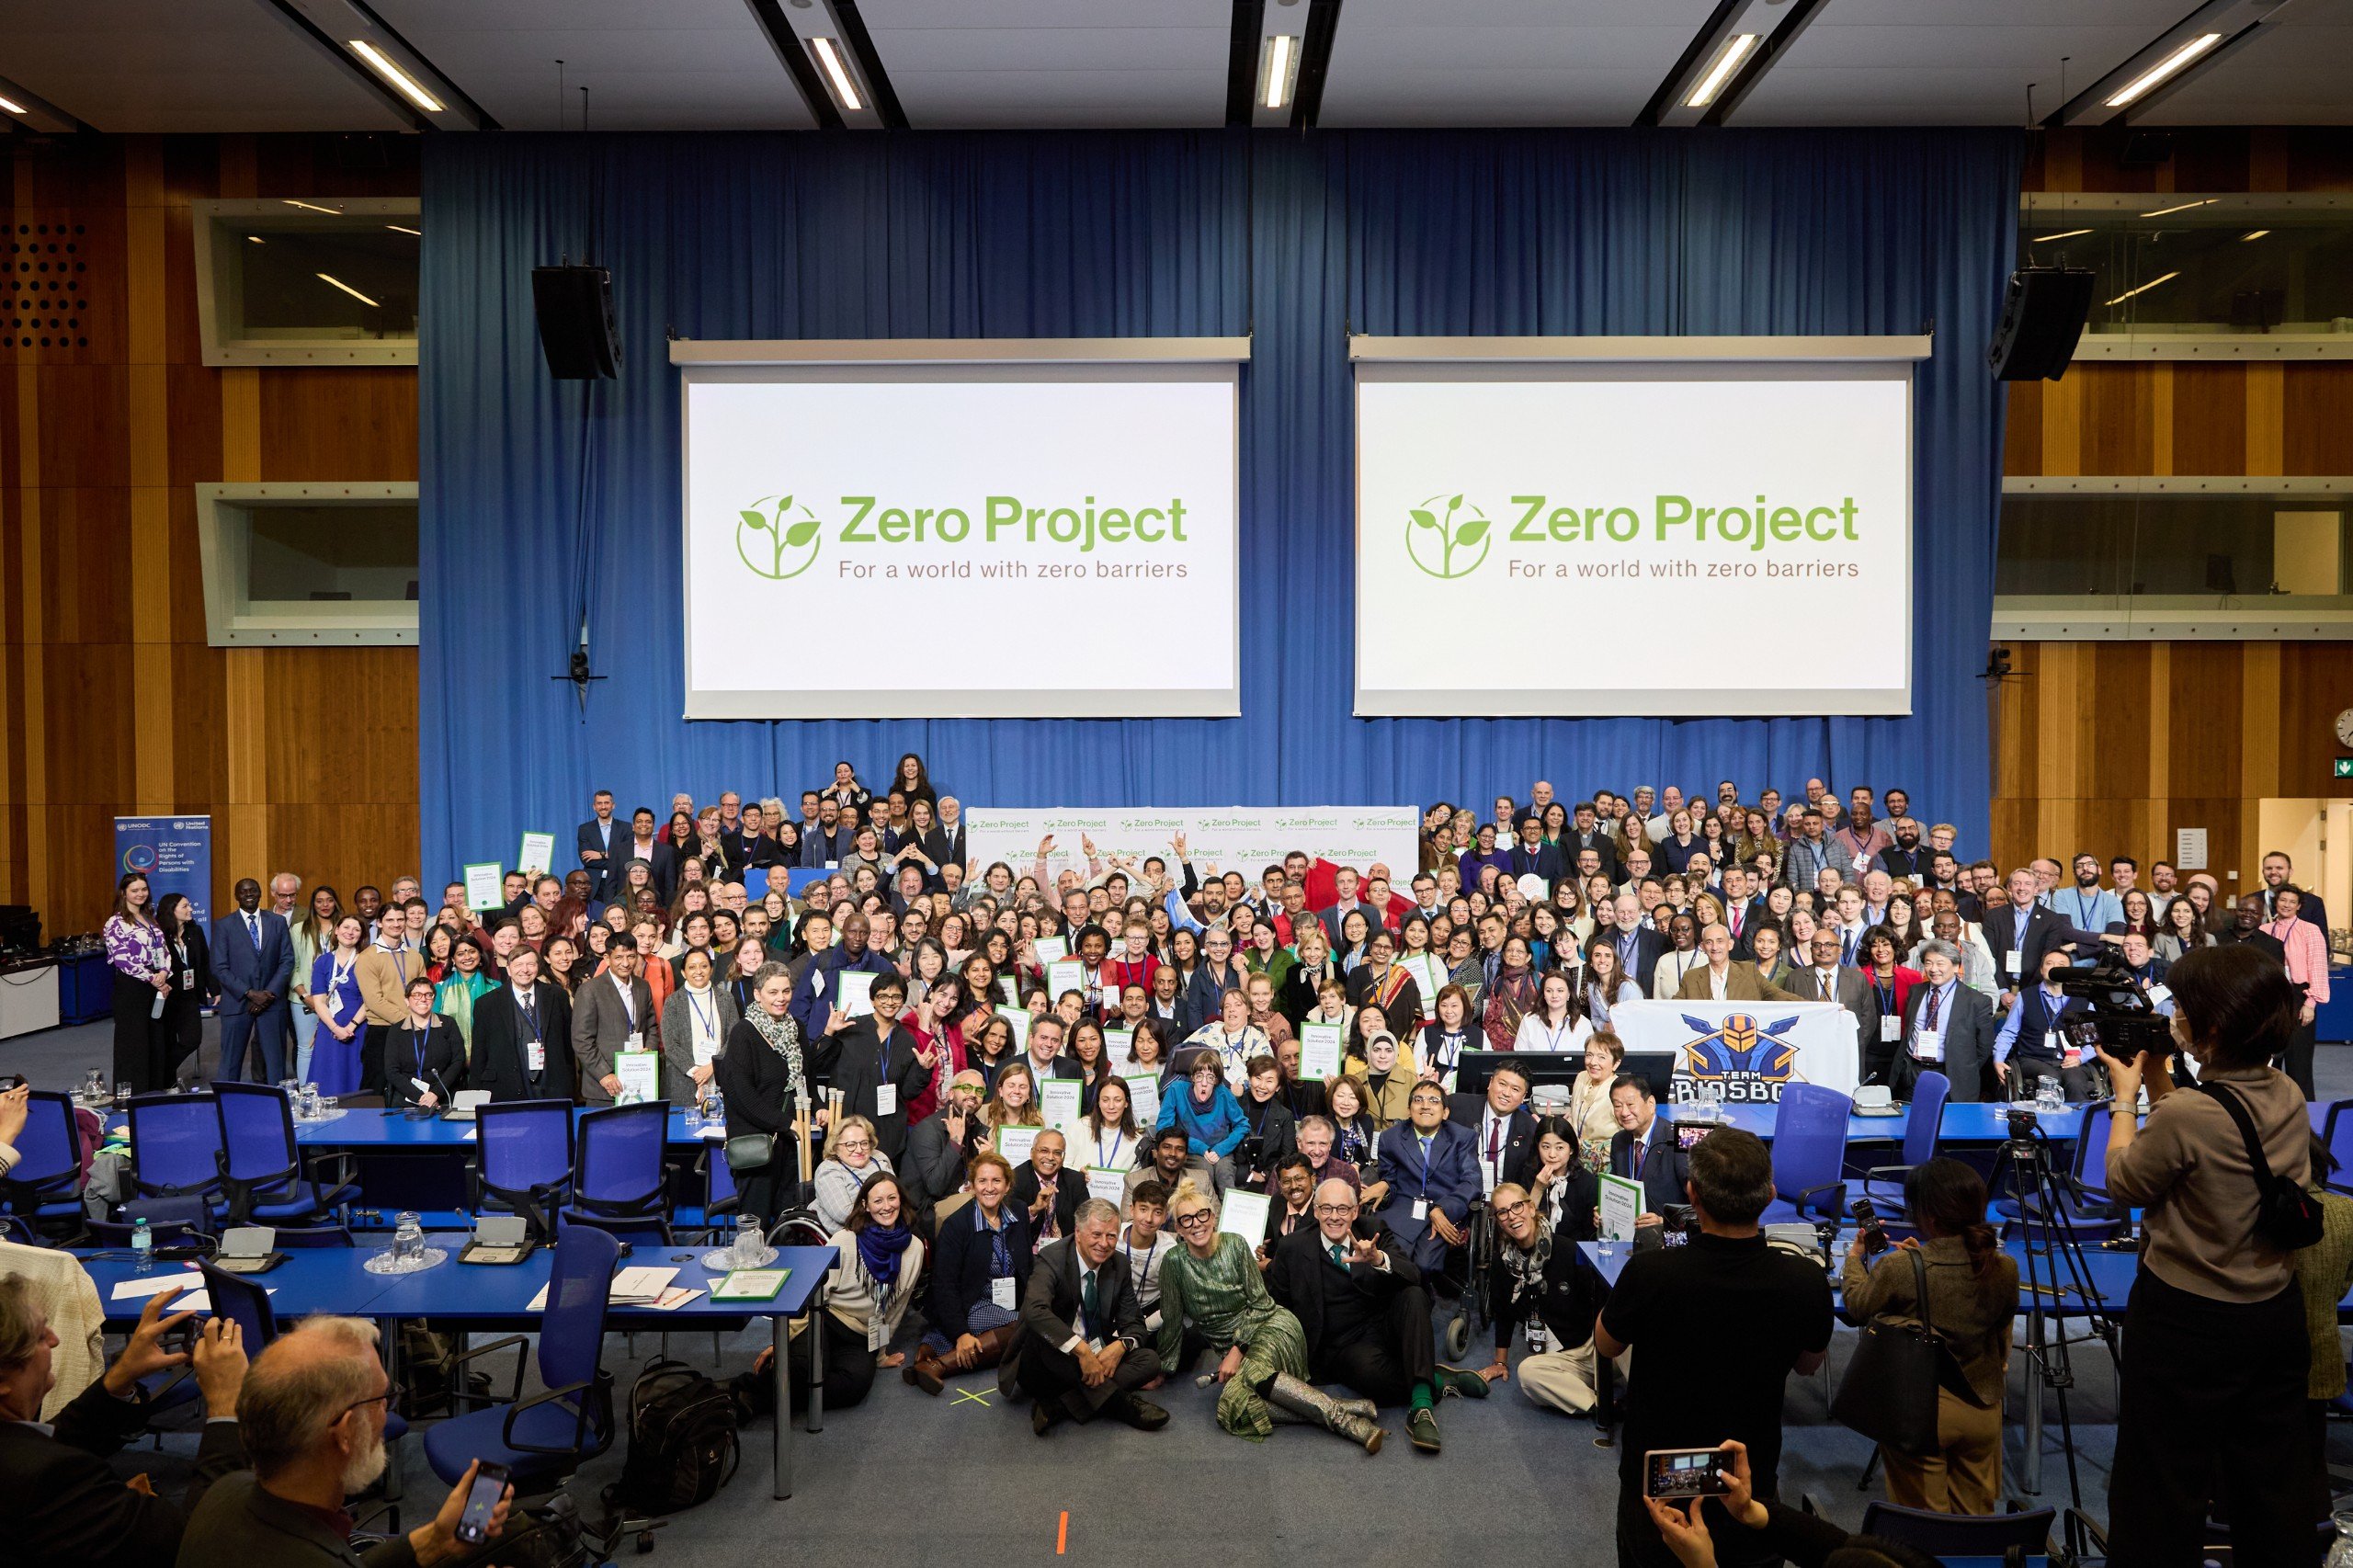 A group of people at an award ceremony standing in front of a large screen displaying the words 'Zero Project'.